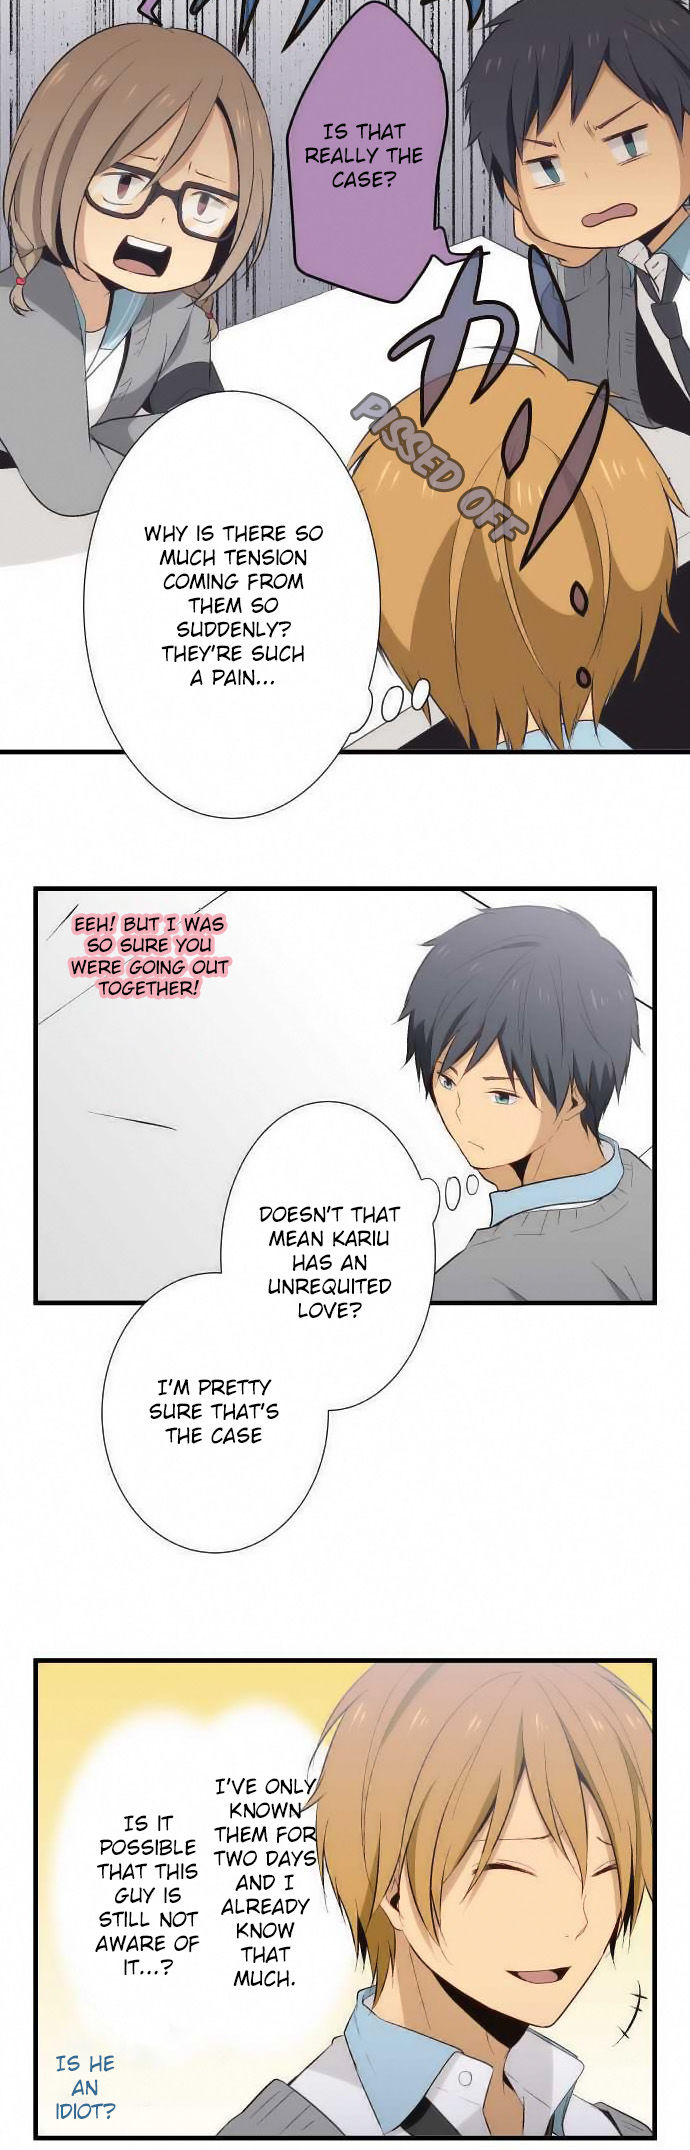 ReLIFE 23